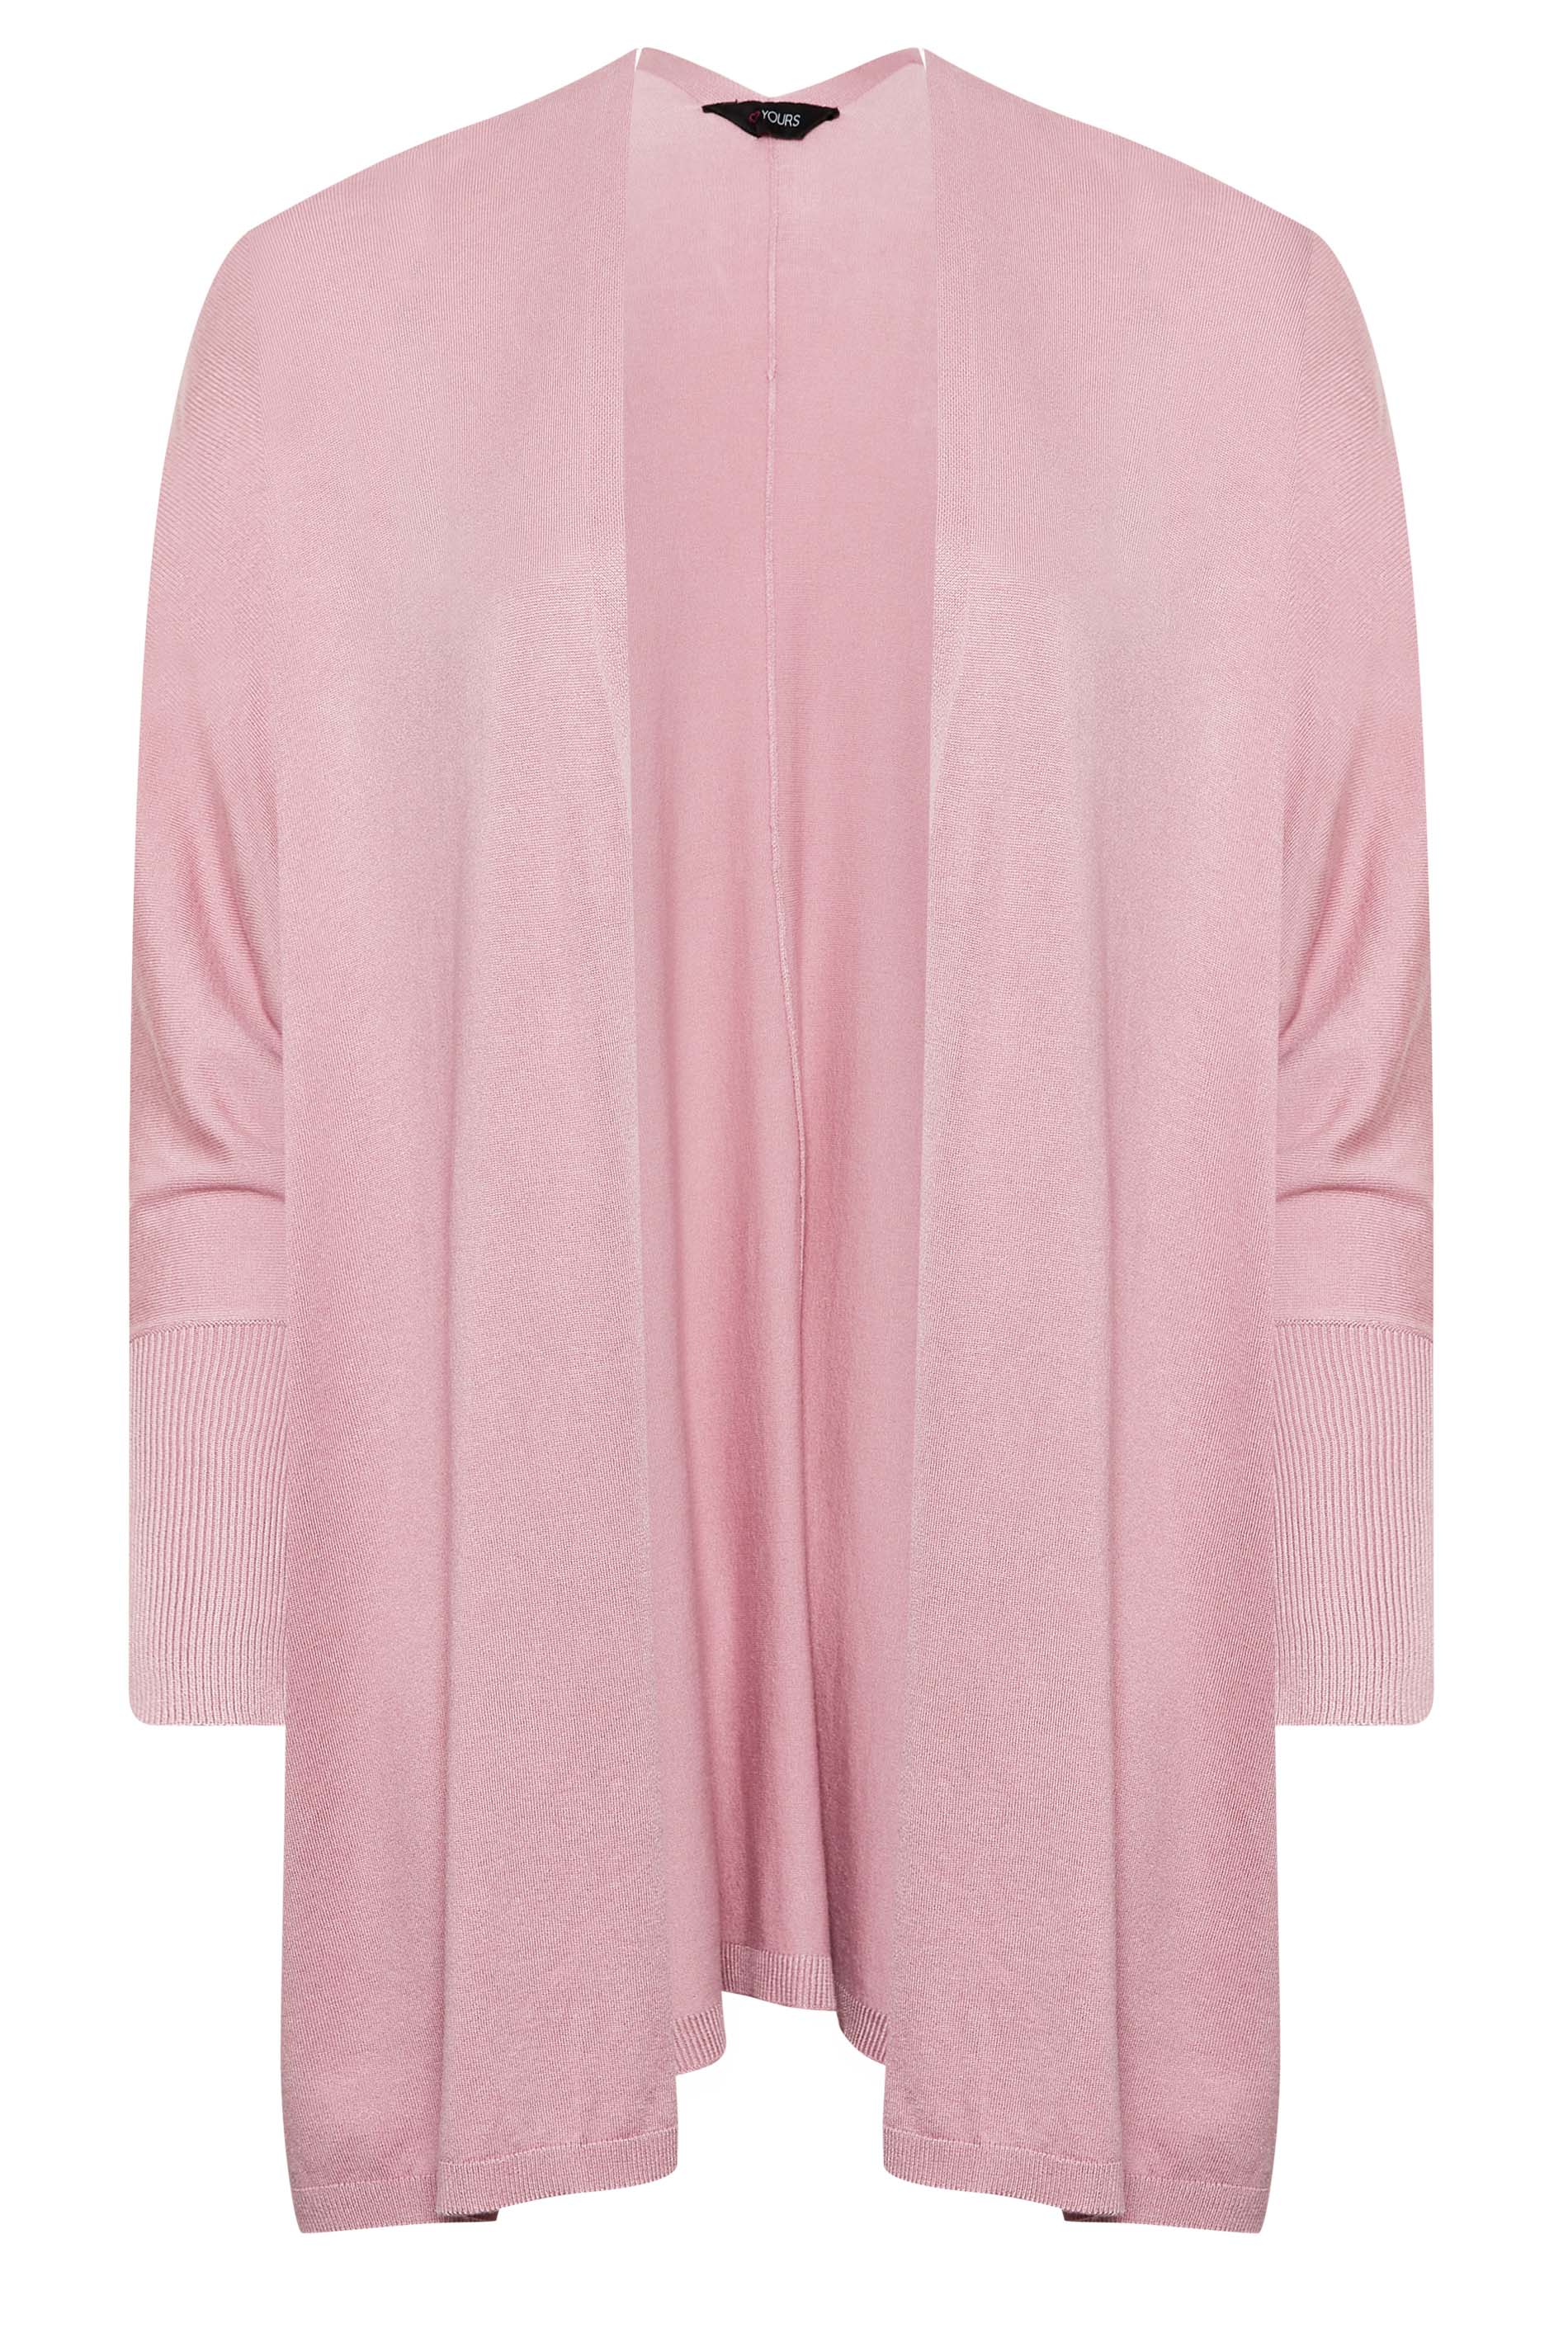 YOURS Plus Size Pink Batwing Sleeve Cardigan | Yours Clothing